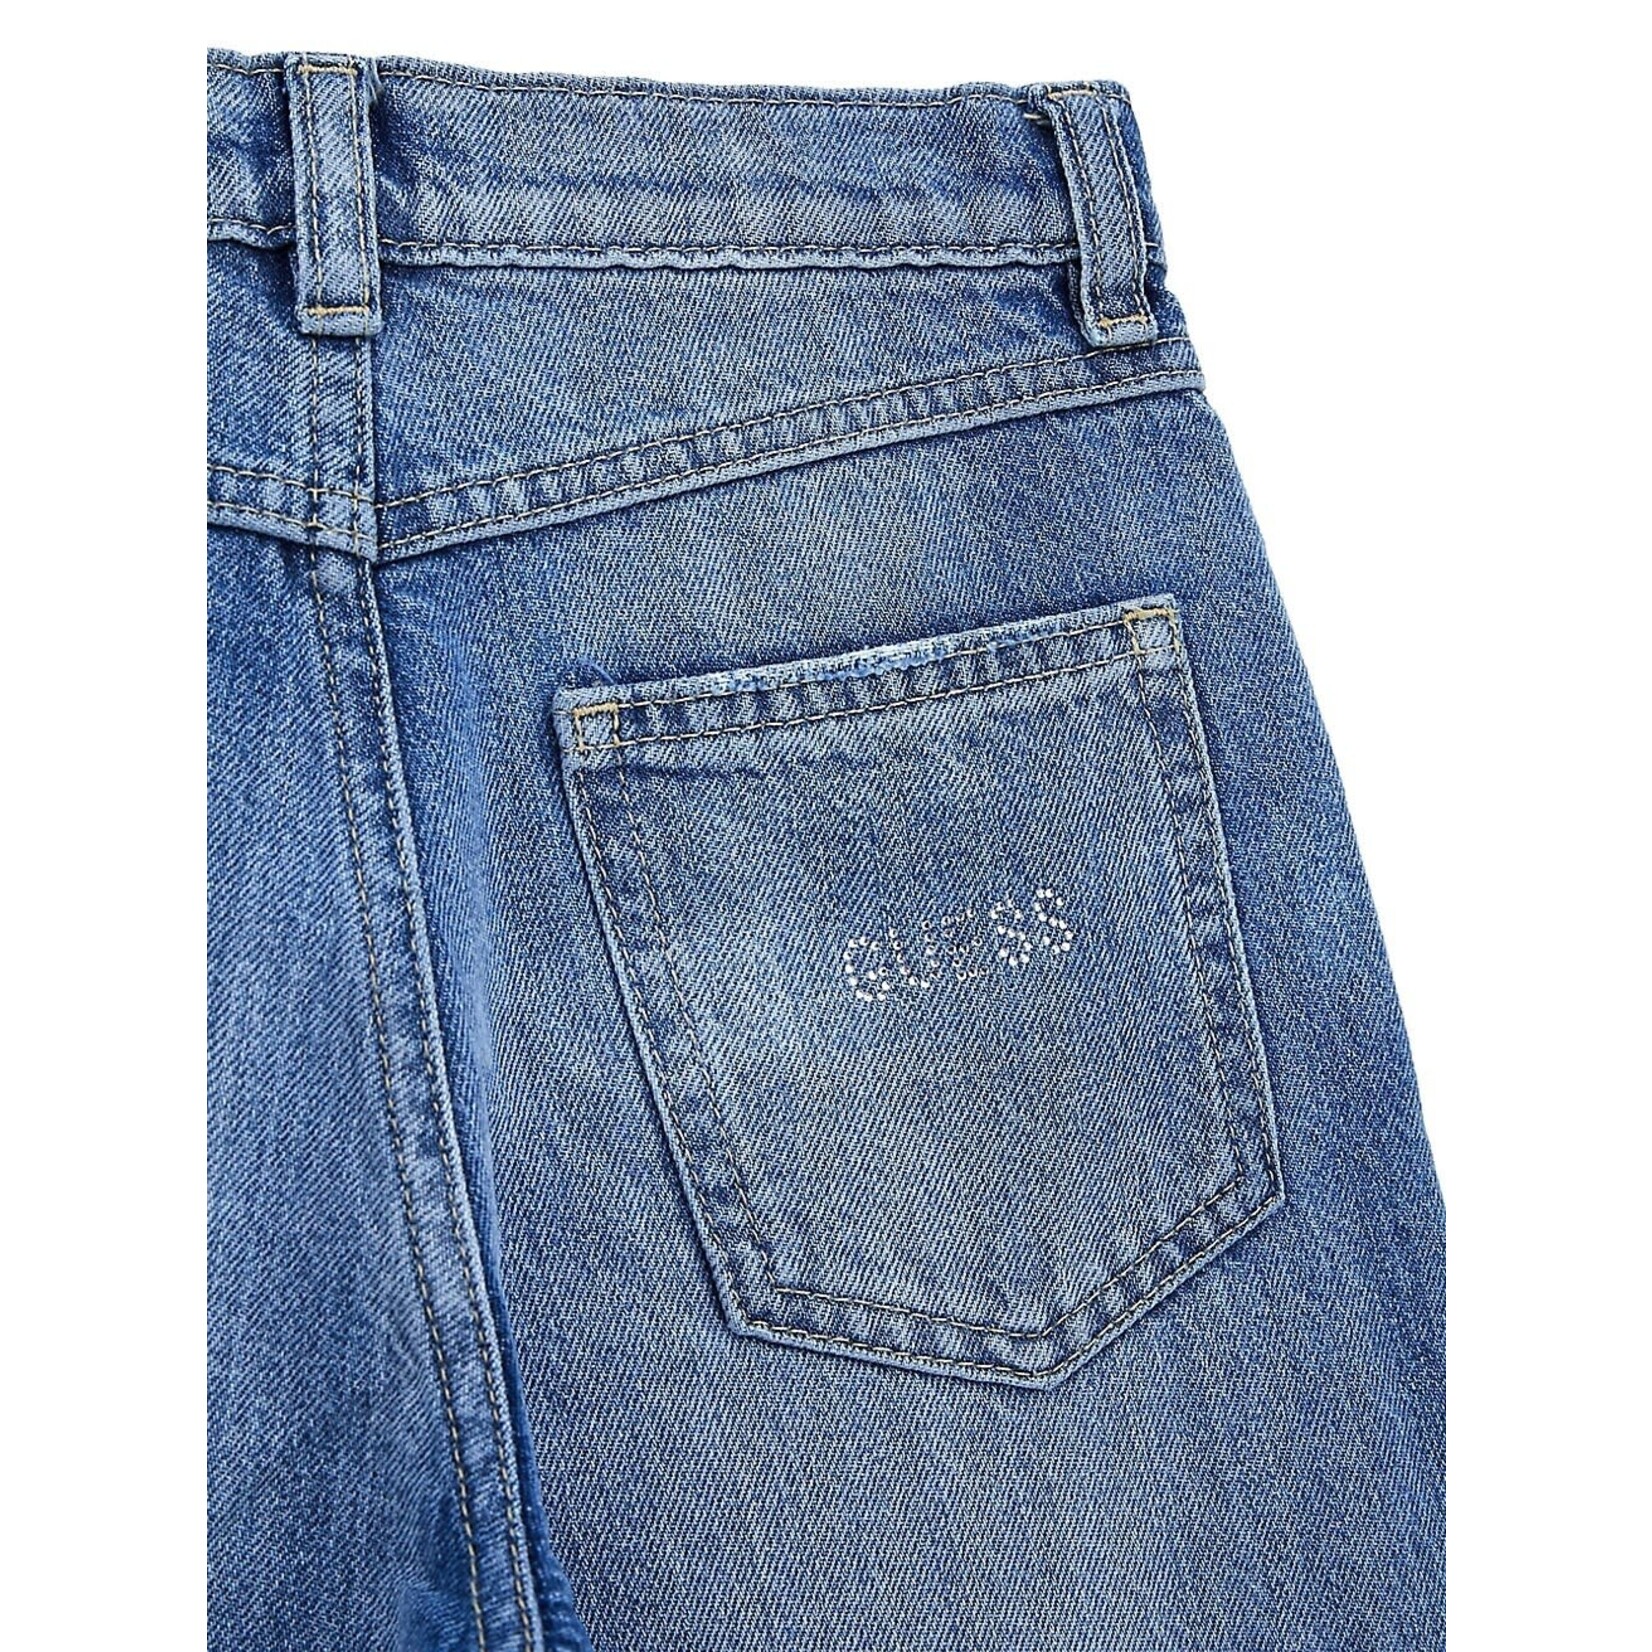 Guess Guess - Denim 90s Jeans